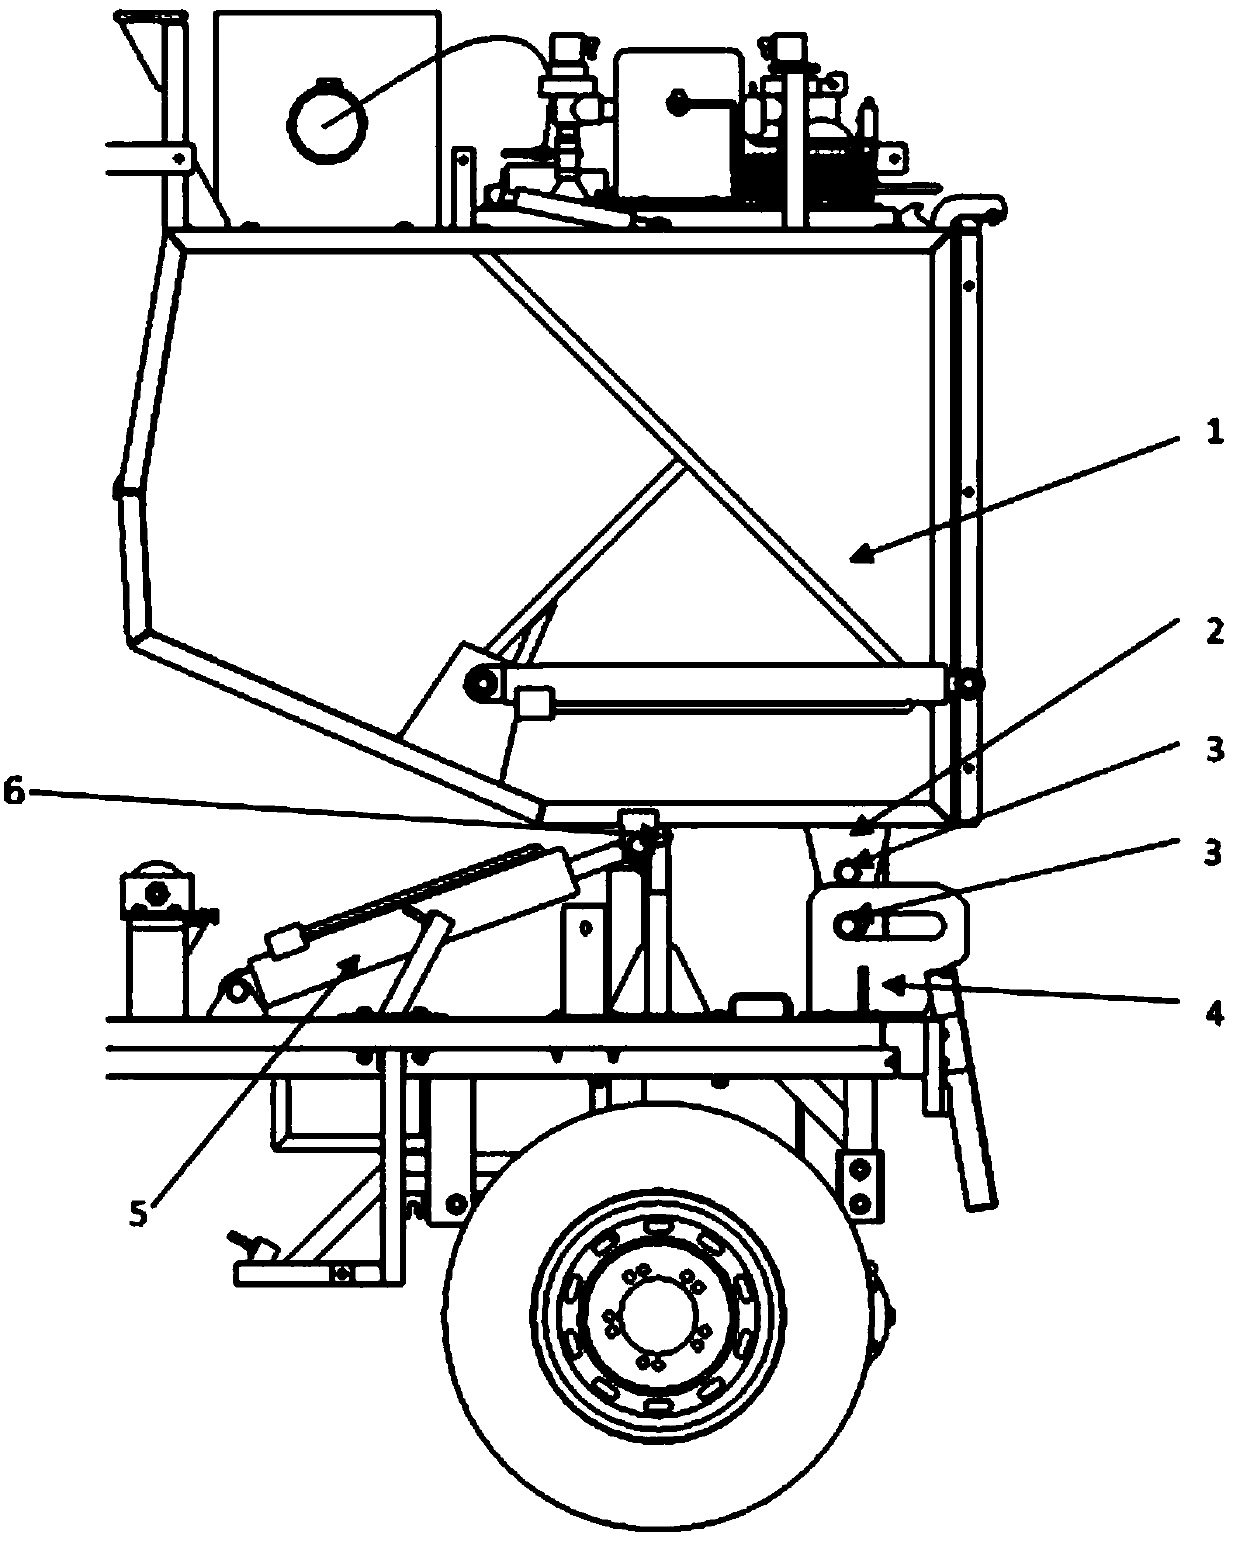 A garbage bin lifting and dumping mechanism